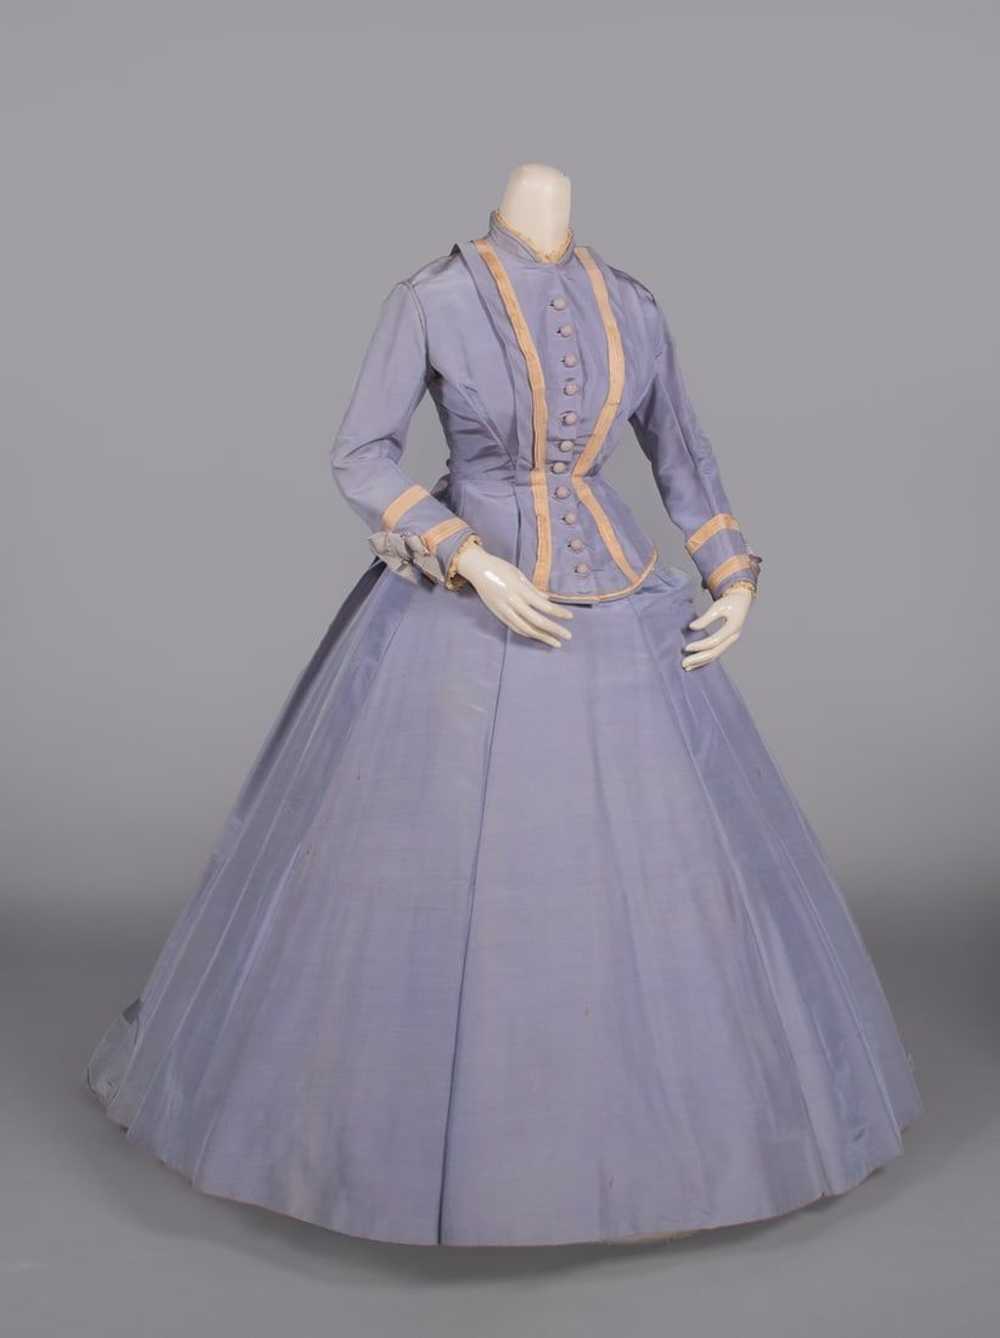 PERIWINKLE SILK FAILLE DAY DRESS, c. 1867 - image 2